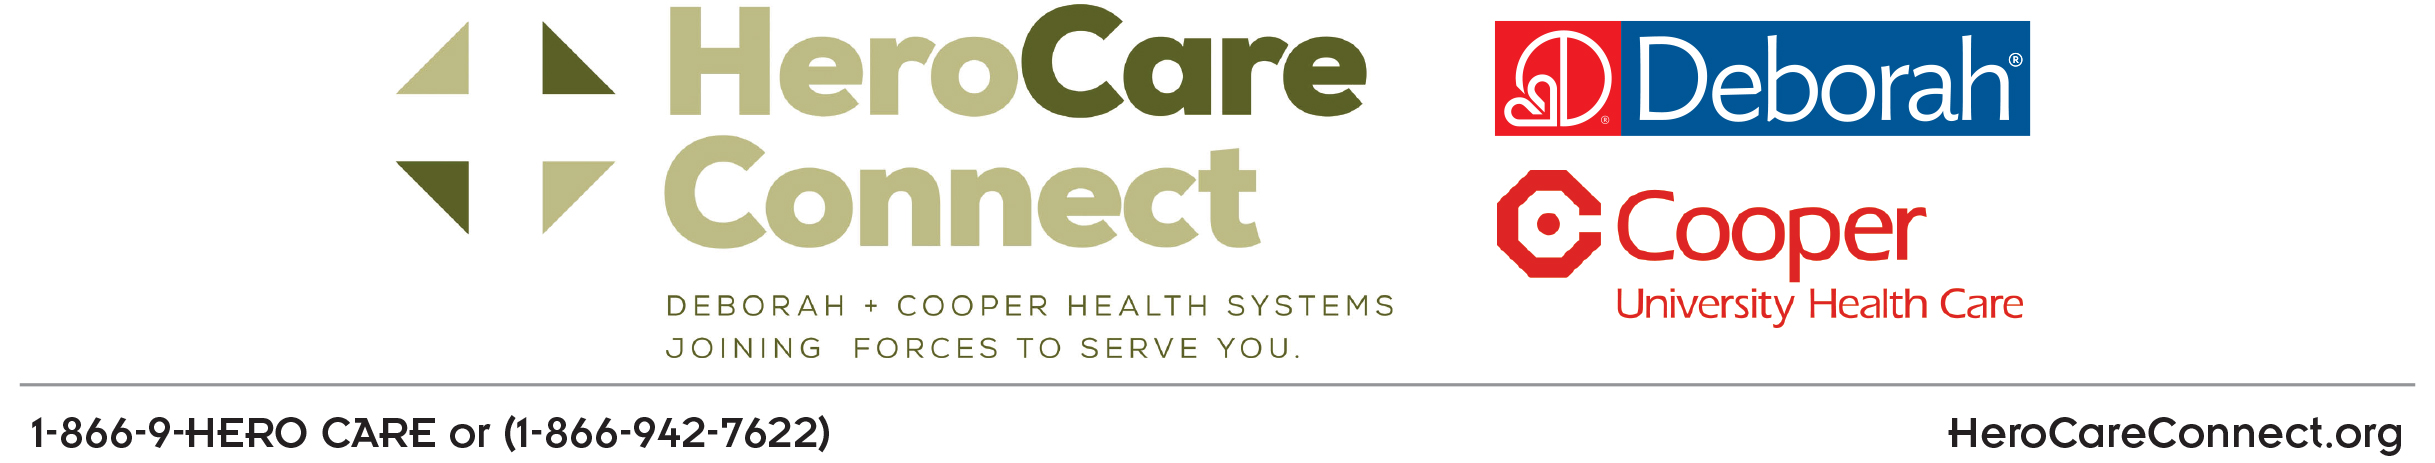 HeroCare Connect